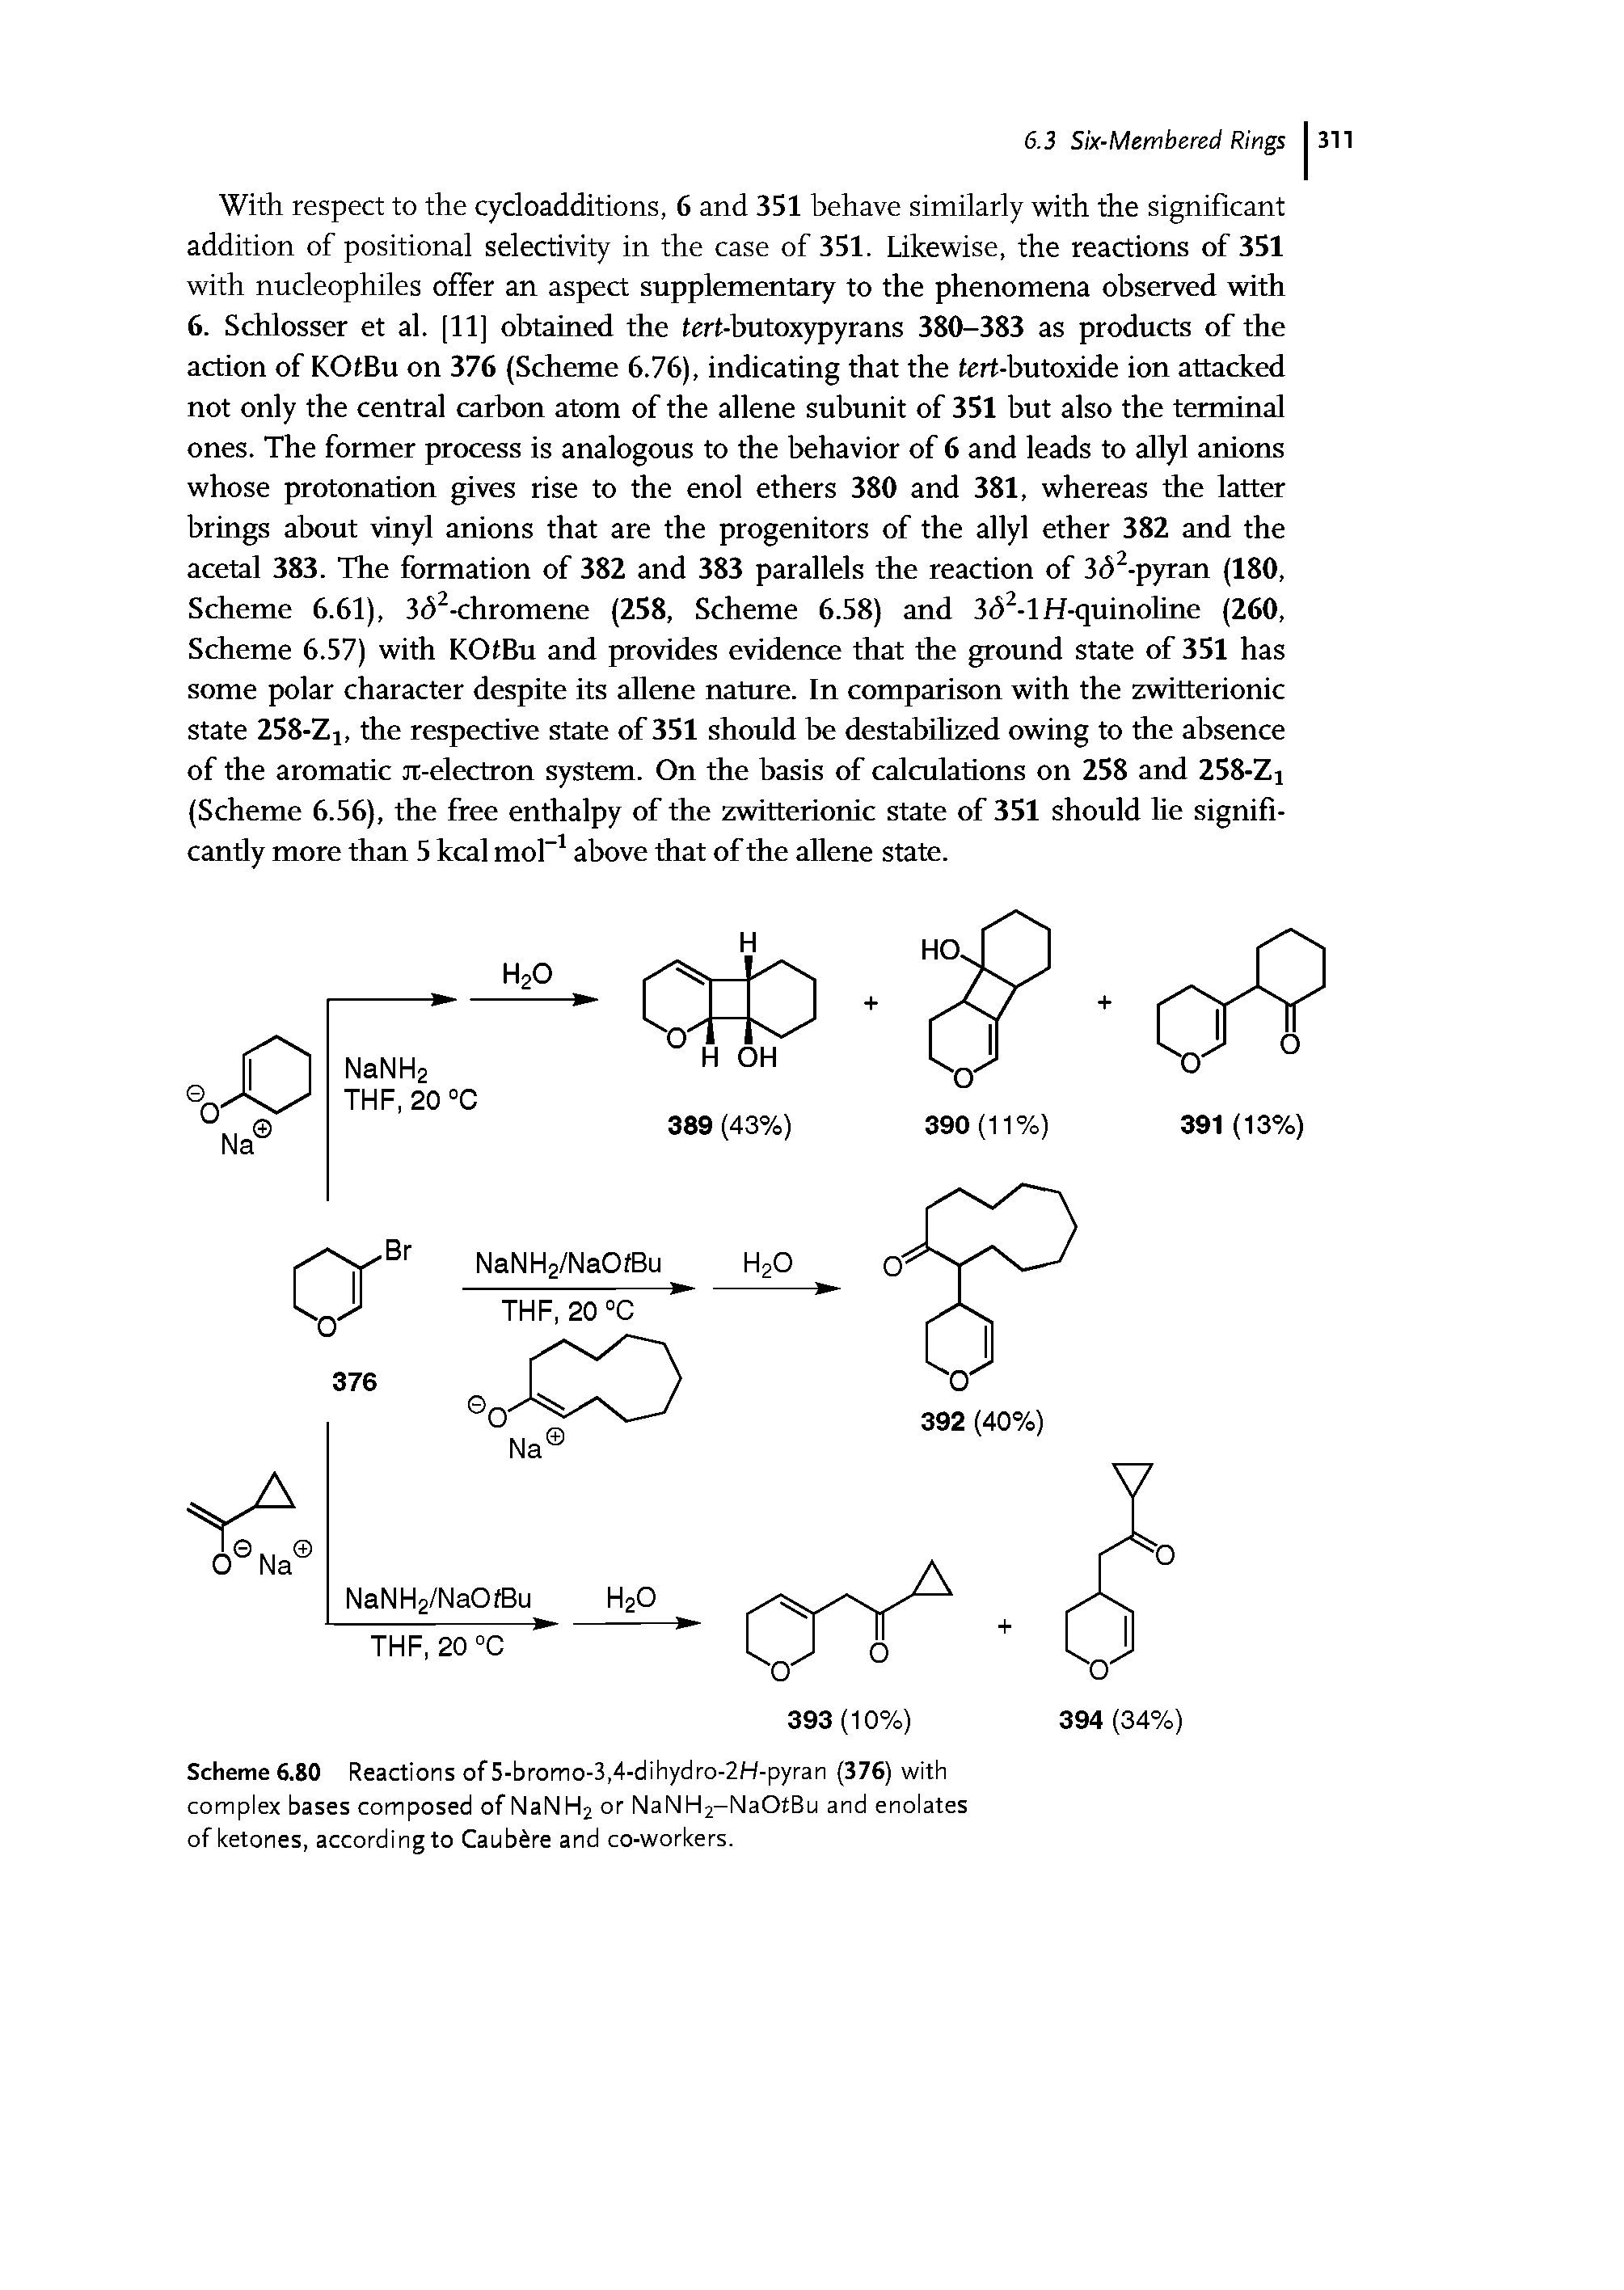 Scheme 6.80 Reactions of 5-bromo-3,4-dihydro-2H-pyran (376) with complex bases composed of NaNH2 or NaNH2-NaOtBu and enolates of ketones, accordingto Caub re and co-workers.